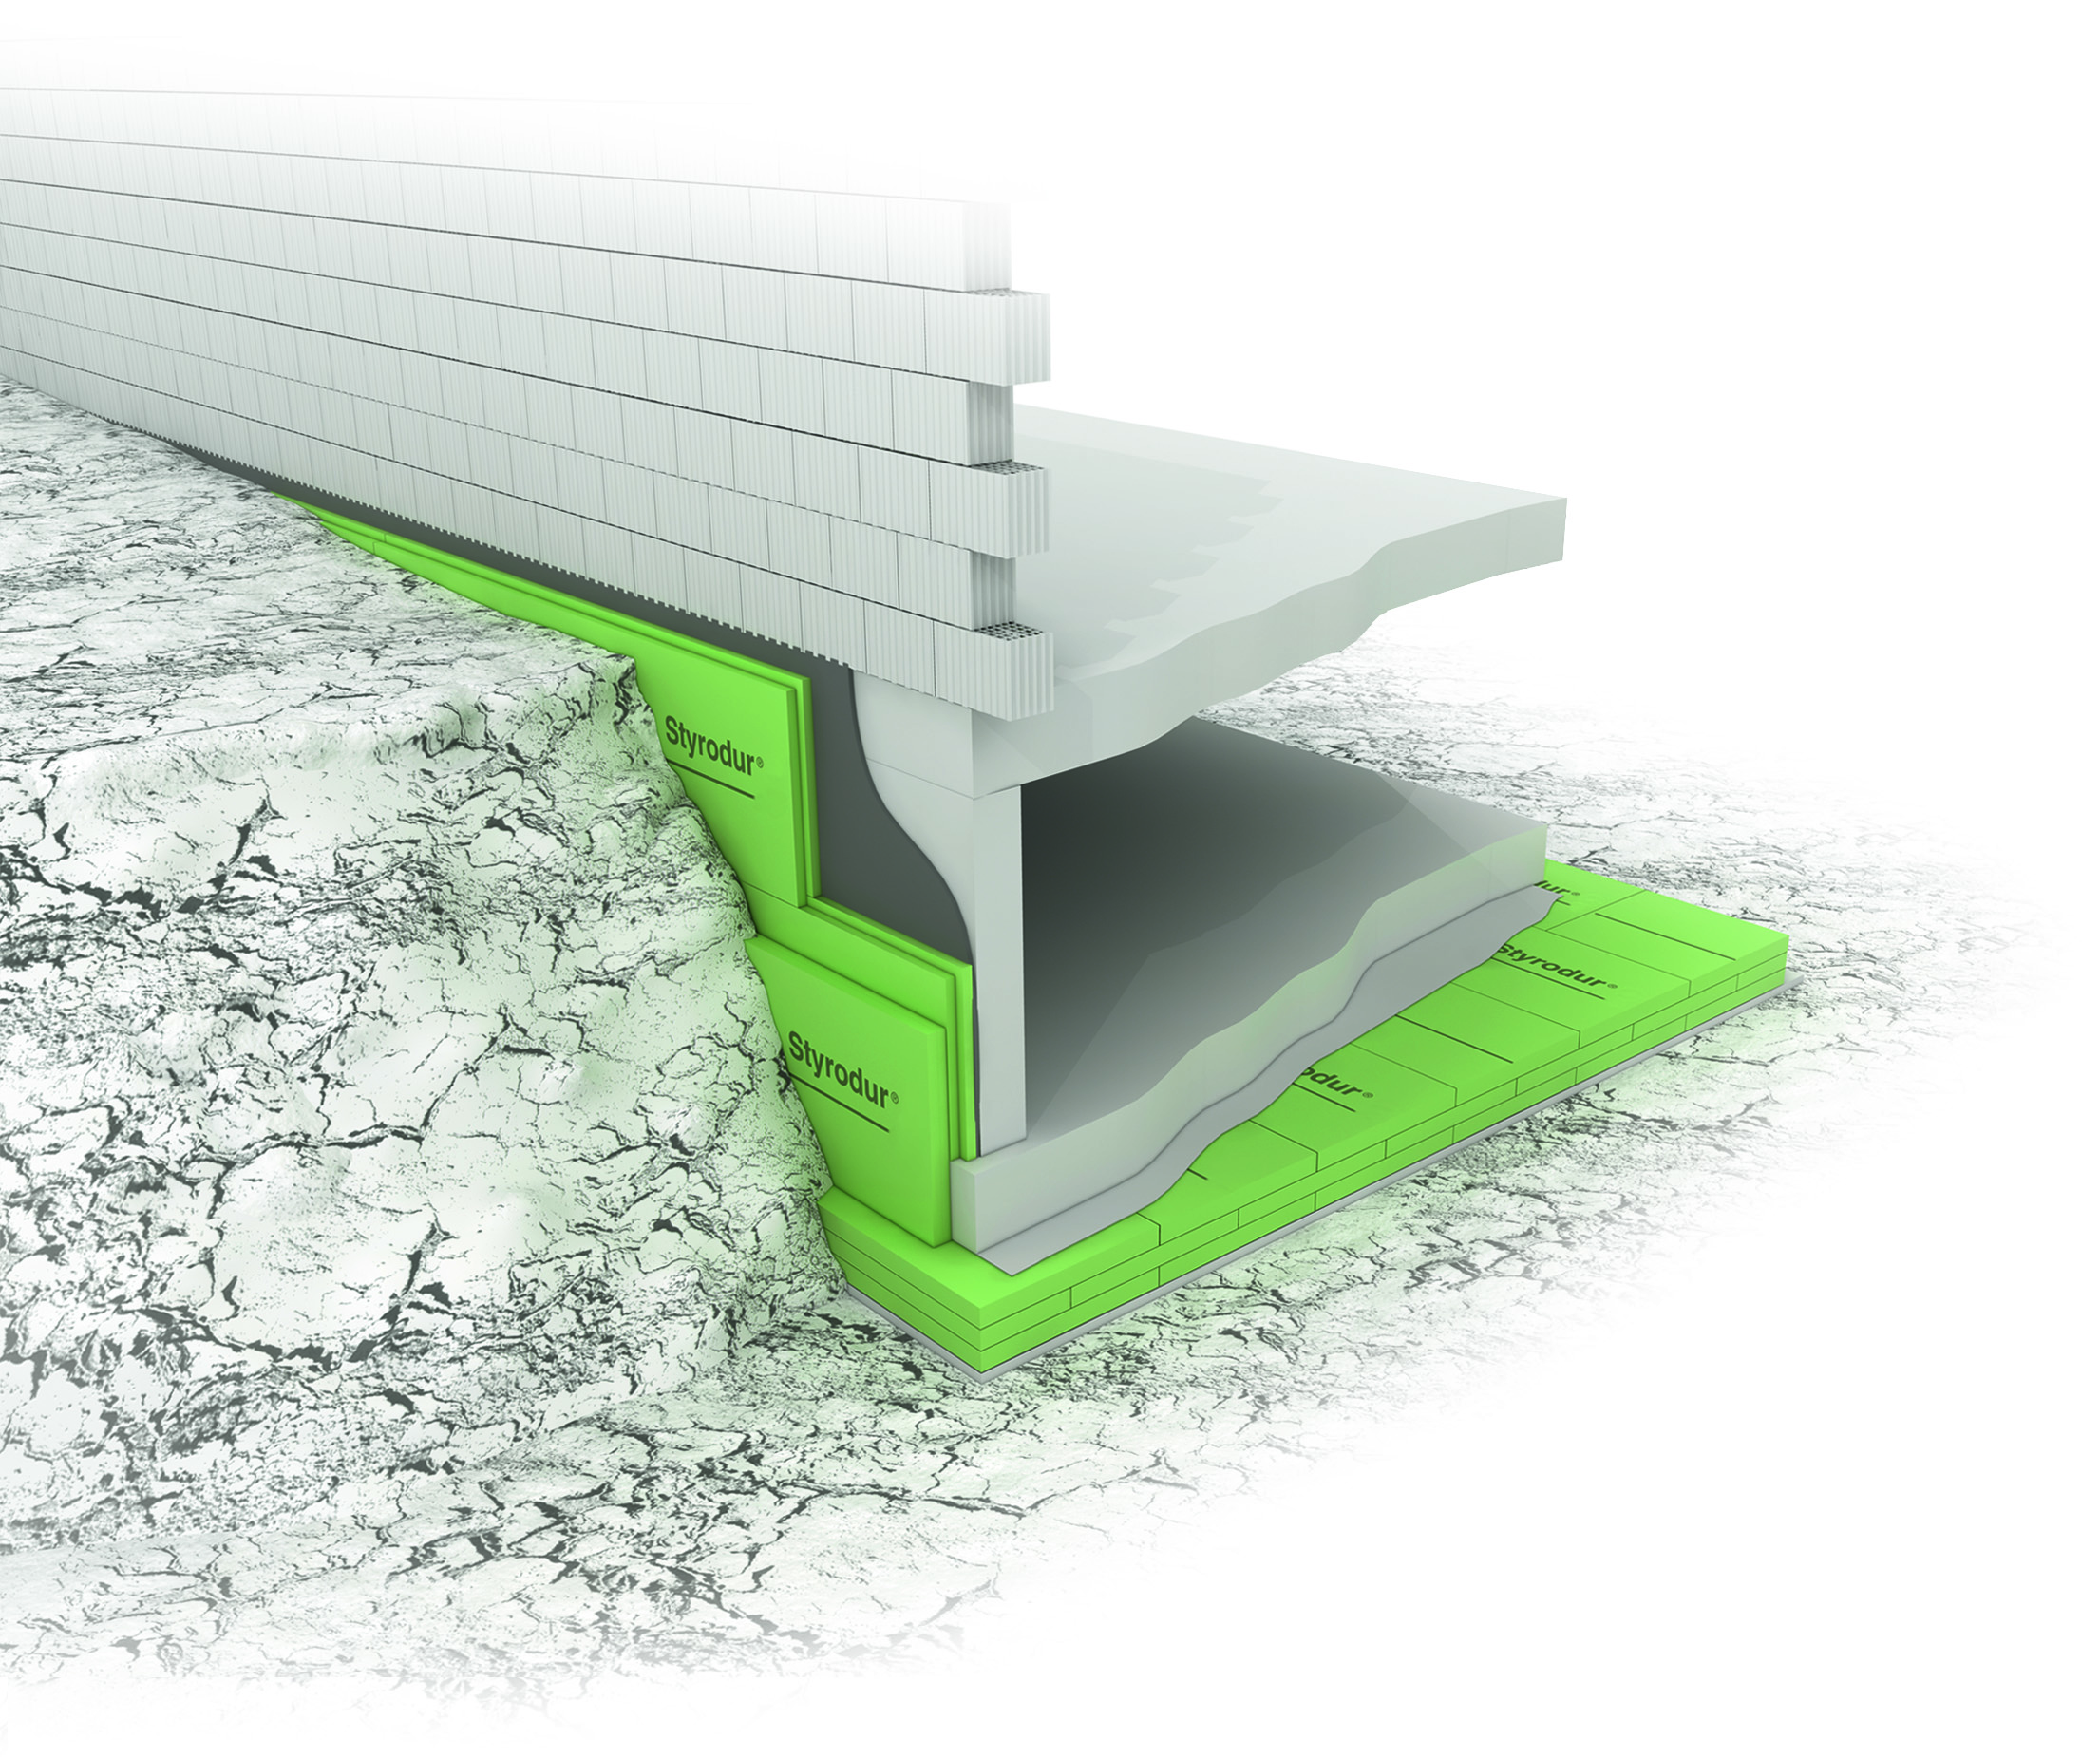 Steep roof insulation - Others - Applications - Safe. Strong. Styrodur -  BASF´s green insulation material